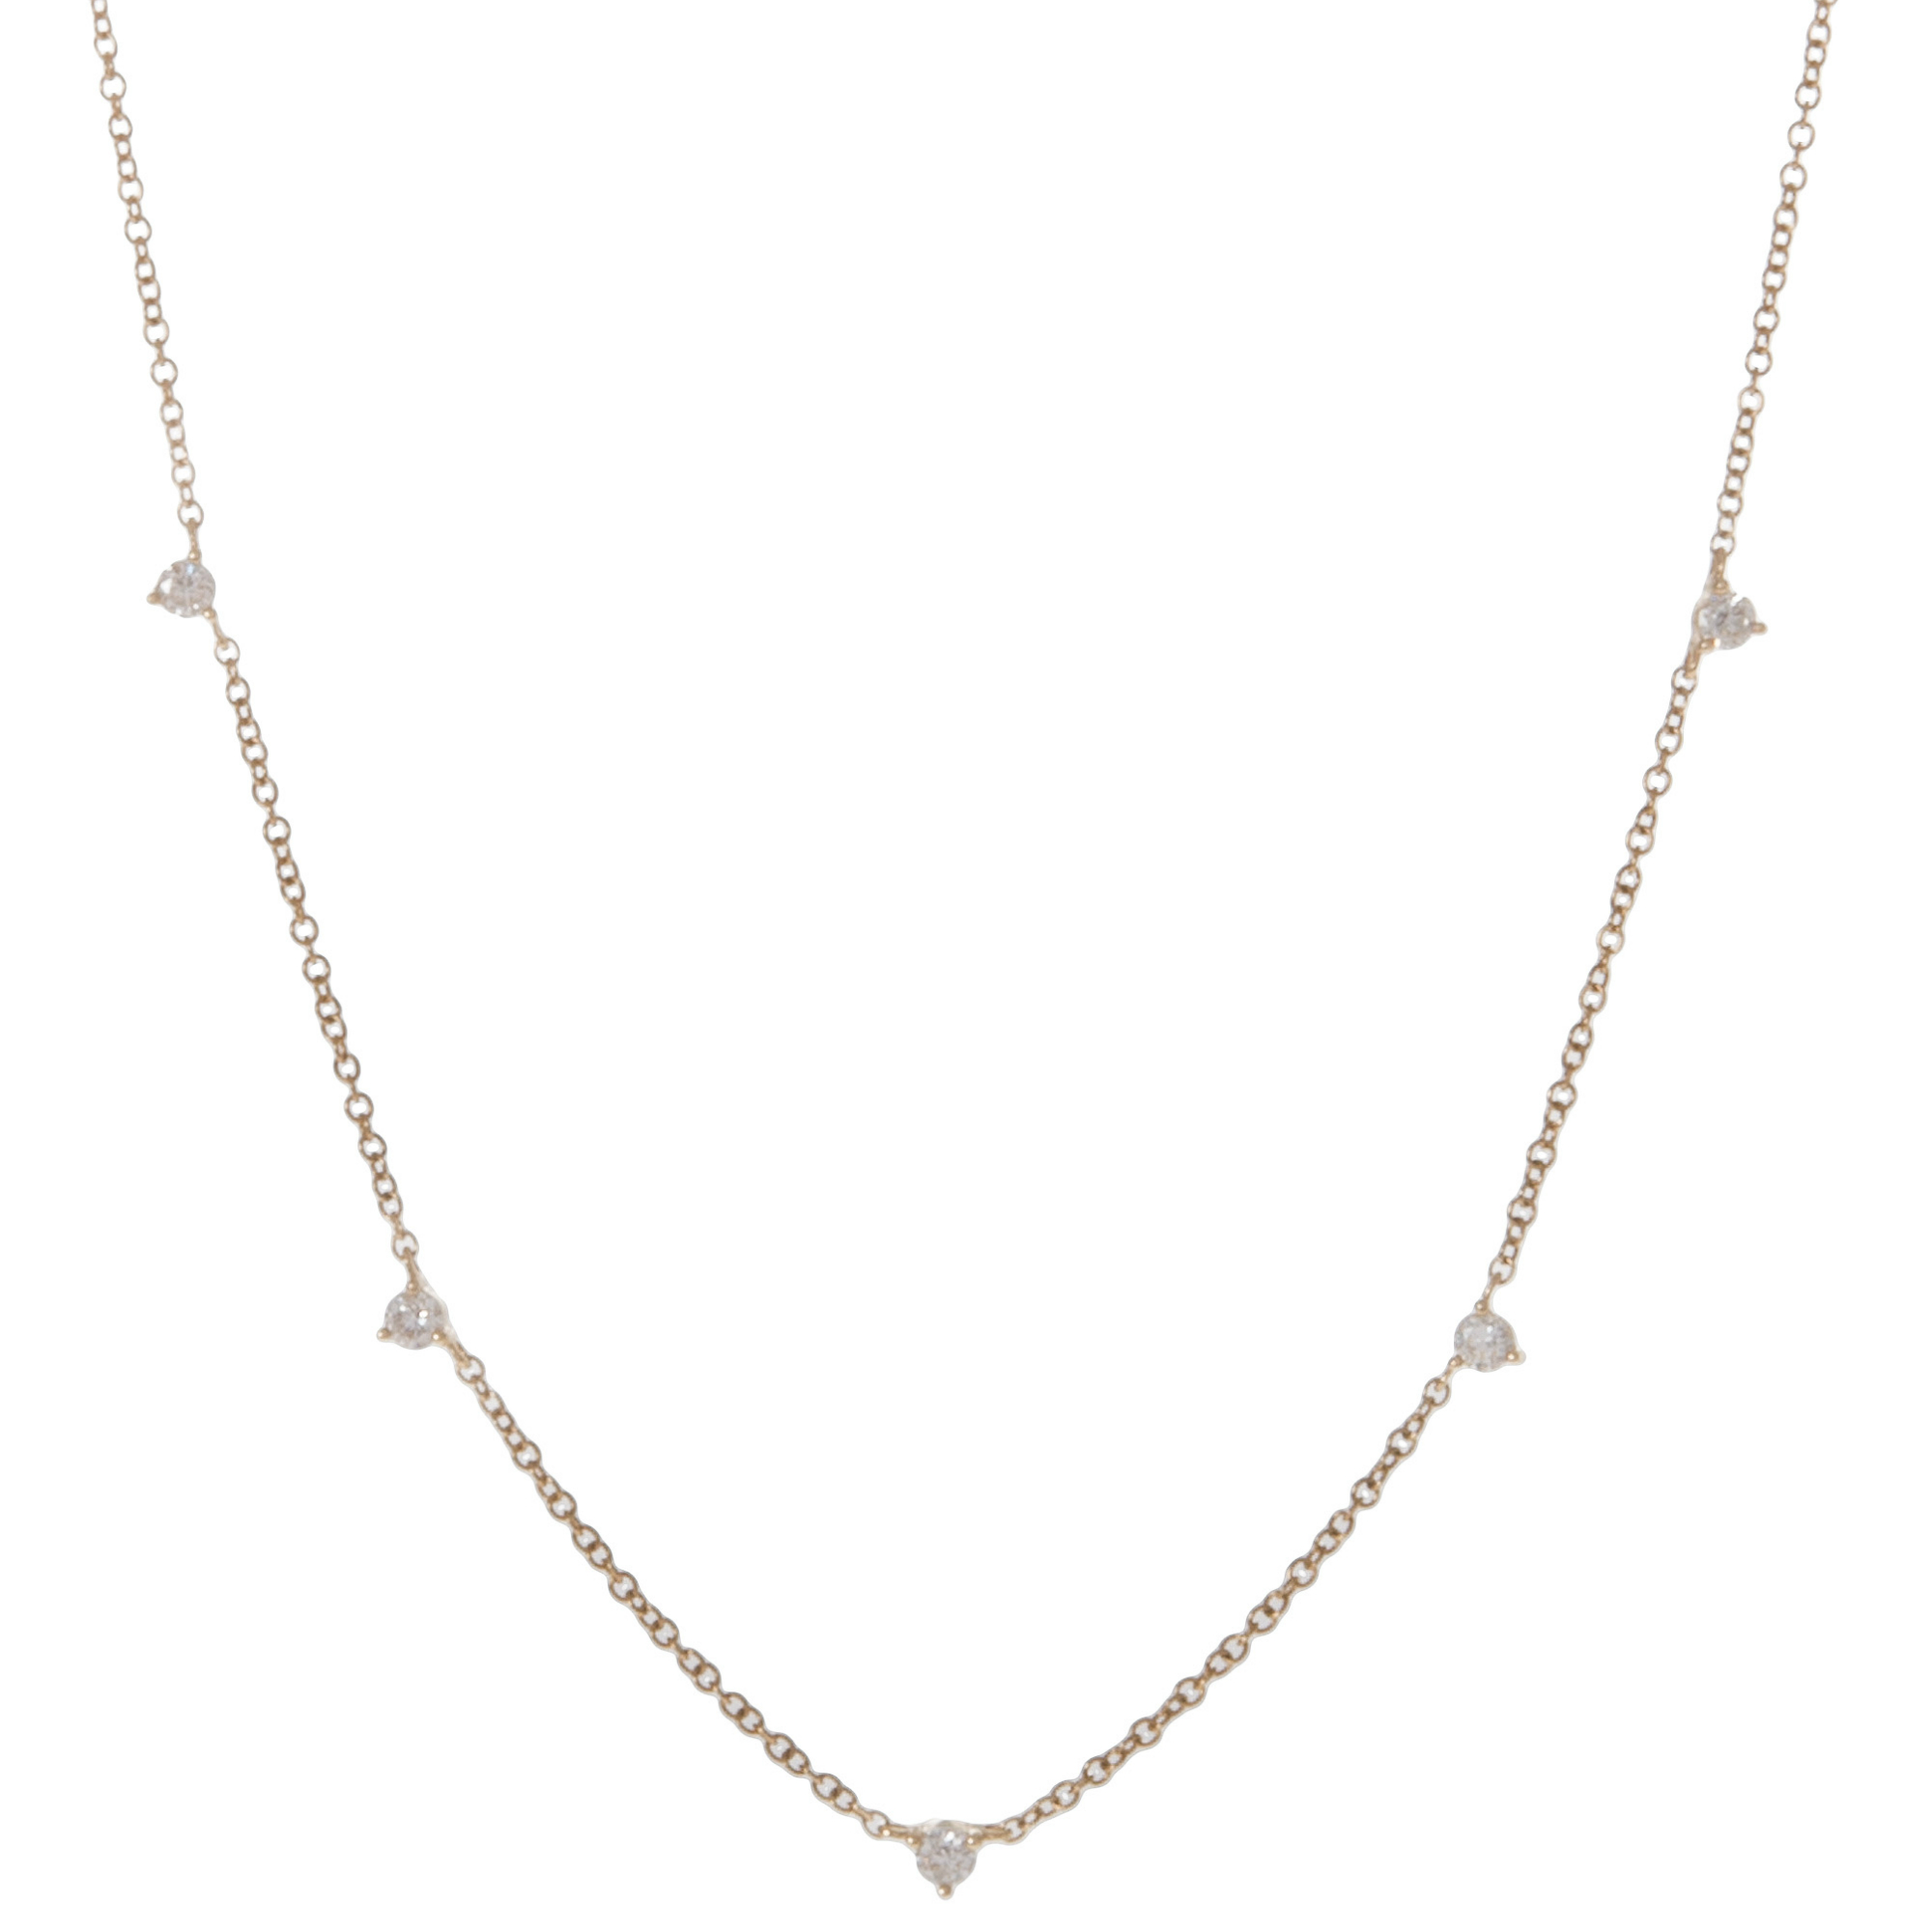 Bloomingdale's Diamond Station Necklace in 14K Yellow Gold, 0.50 ct. t.w. |  Bloomingdale's